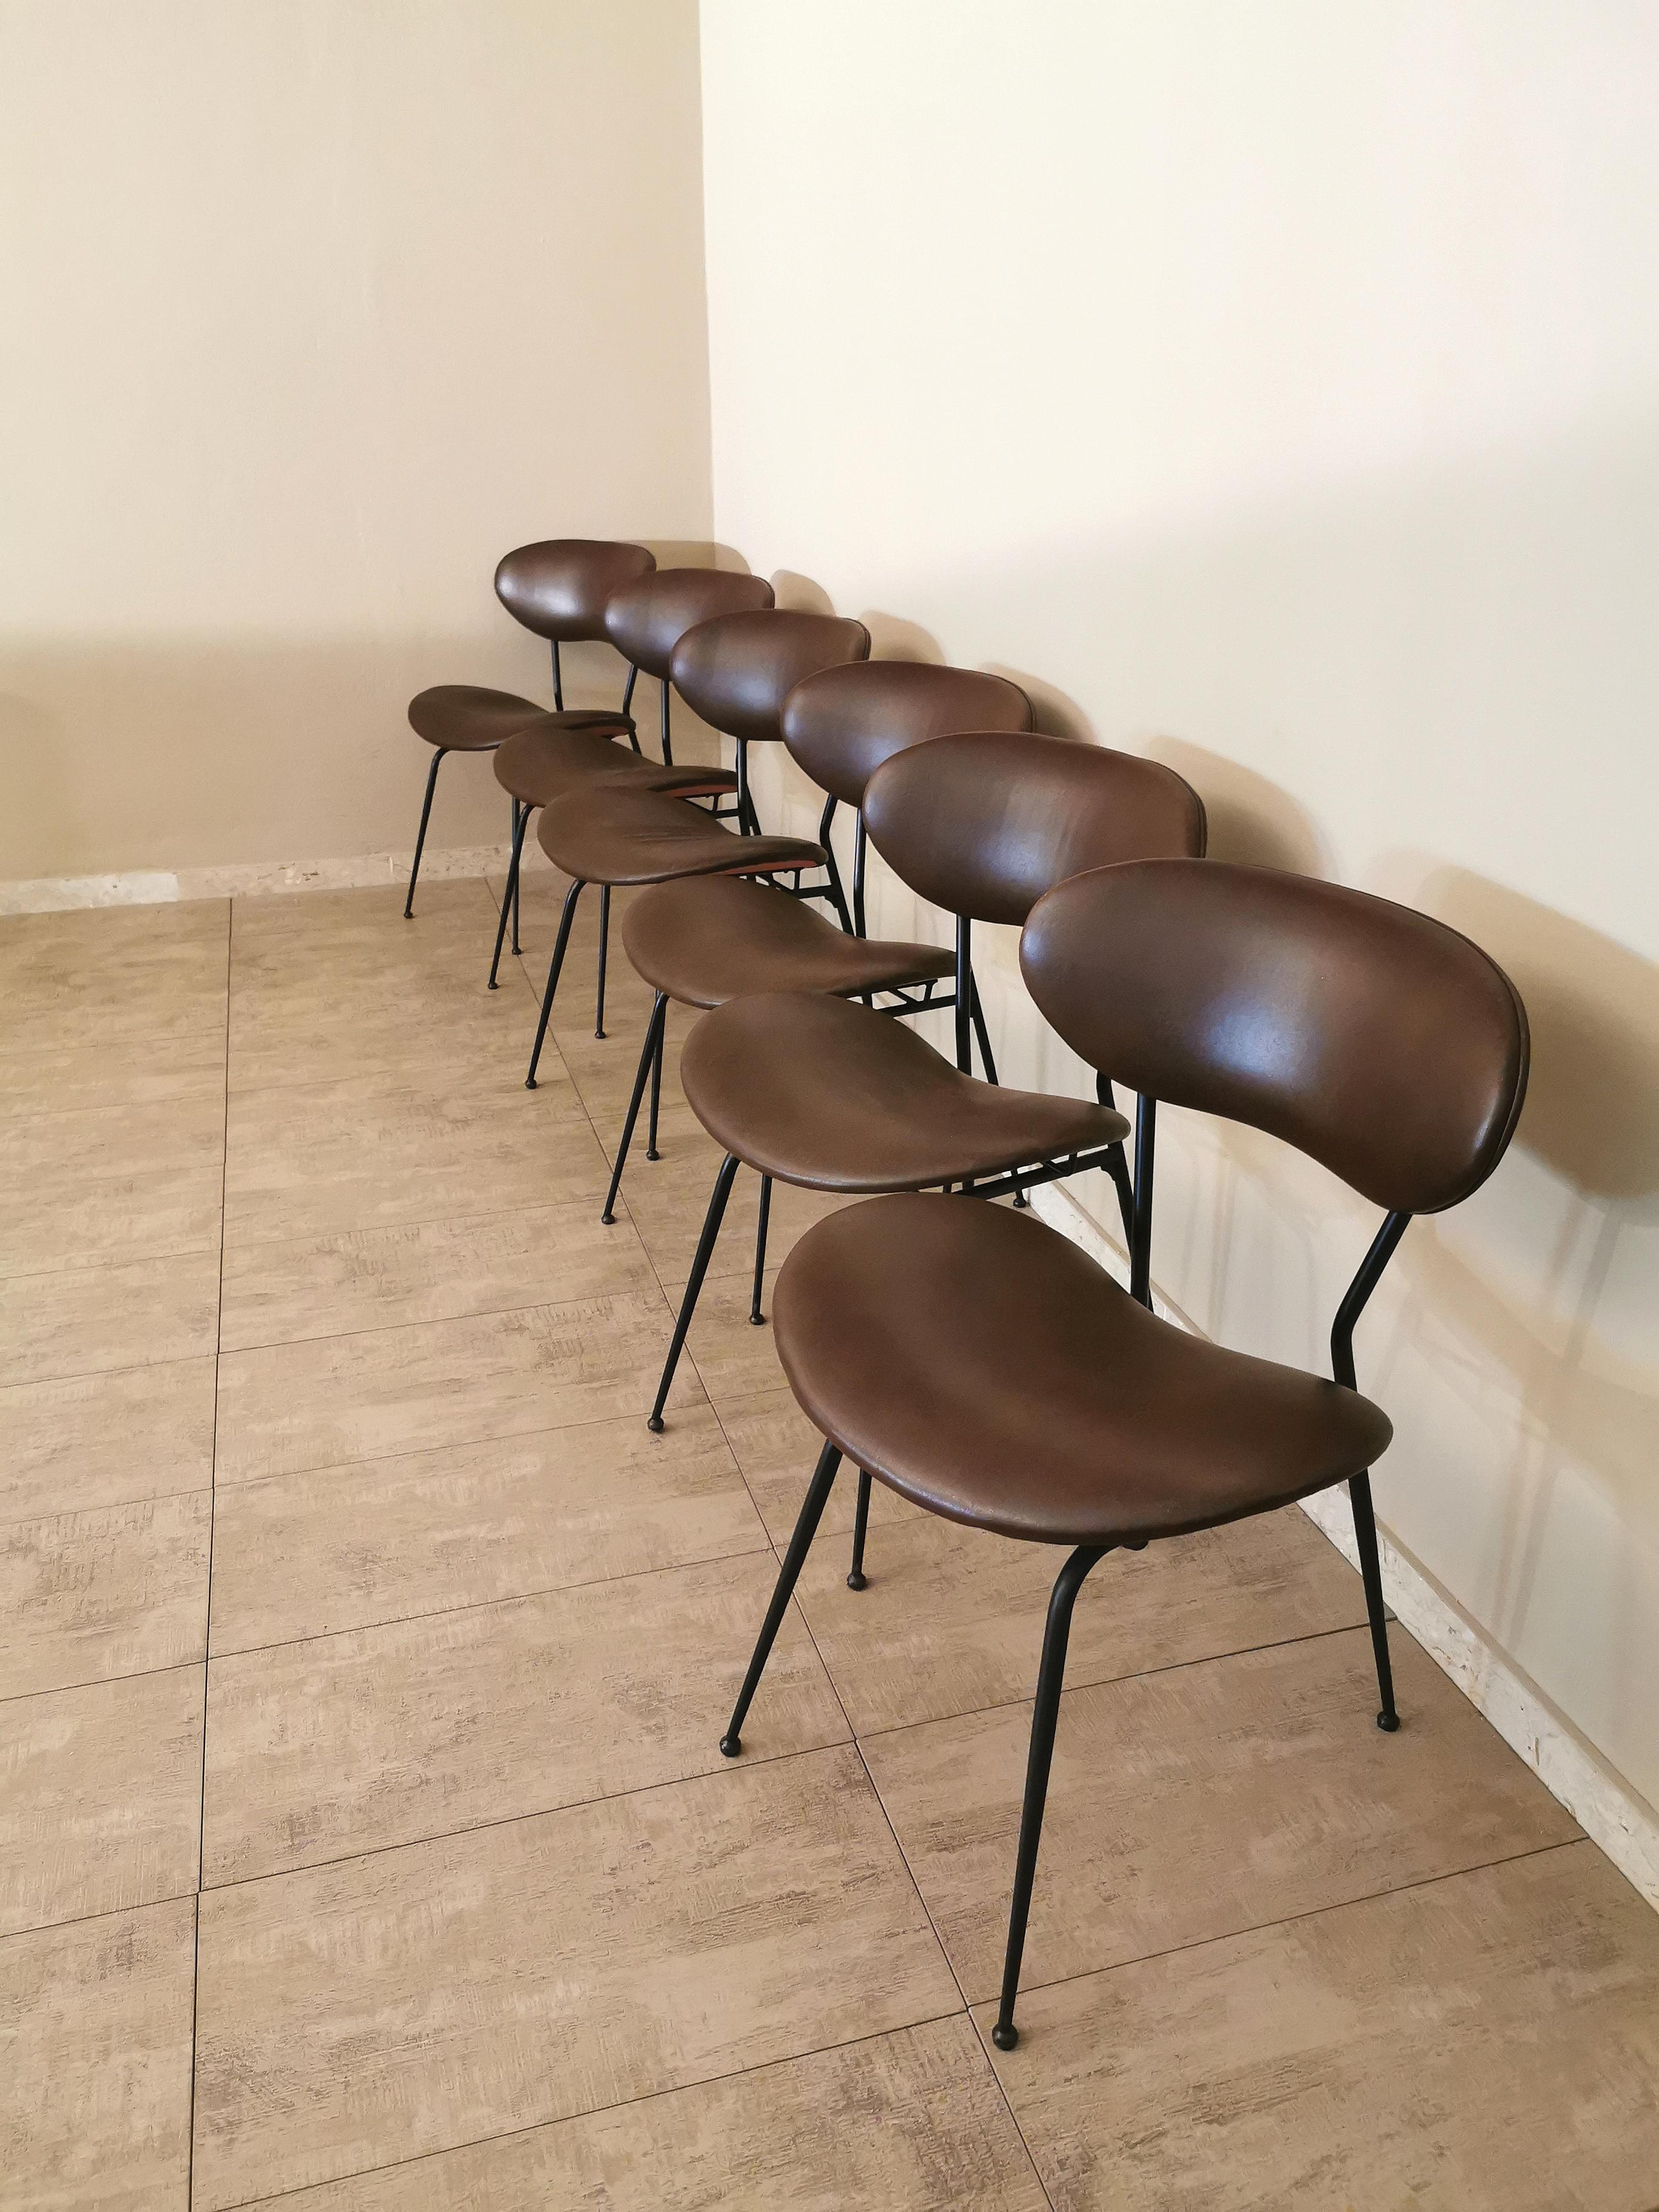 Set of 6 dining chairs designed by the Italian designer Gastone Rinaldi with black enamelled metal structure, anatomical seats and backrests covered in brown leather-eco-leather. Note the slender and elegant line of the structure and despite its